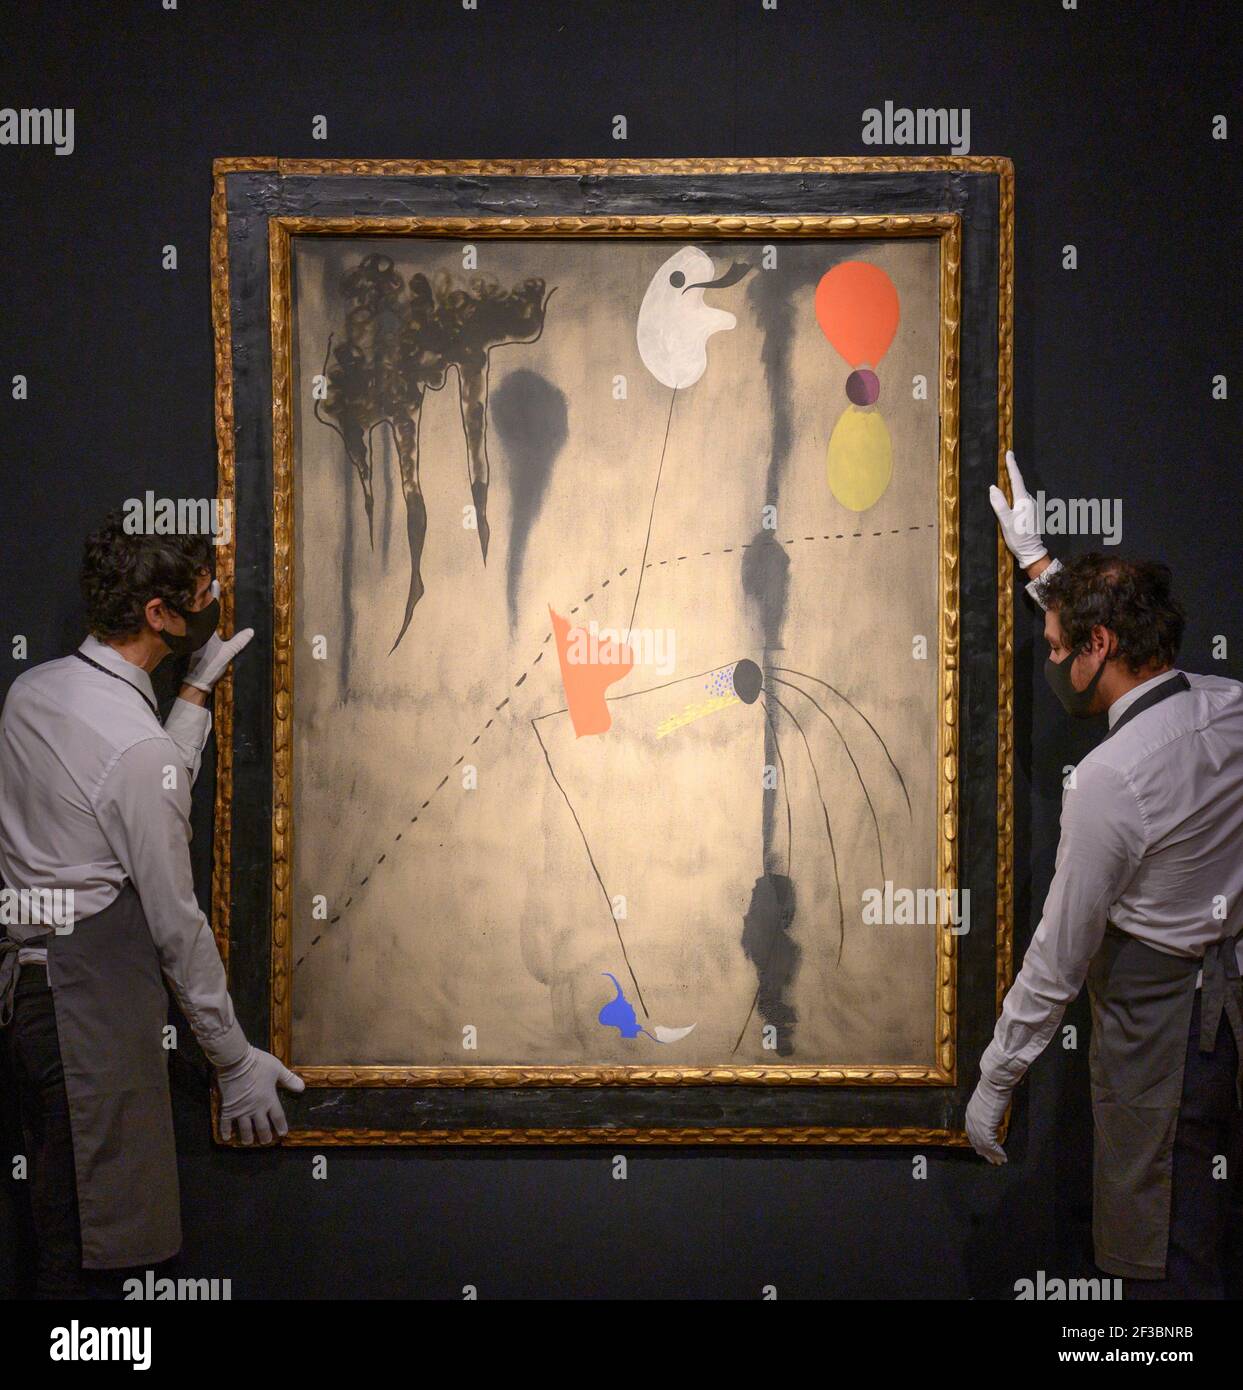 Christies, London, UK. 16 March 2021. Preparations behind closed doors for the livestreamed 20th Century Art evening sale and The Art of the Surreal sale 23 March. Image: Joan Miró, Peinture, (1925), estimate of £9,000,000-14,000,000. Credit: Malcolm Park/Alamy Live News Stock Photo